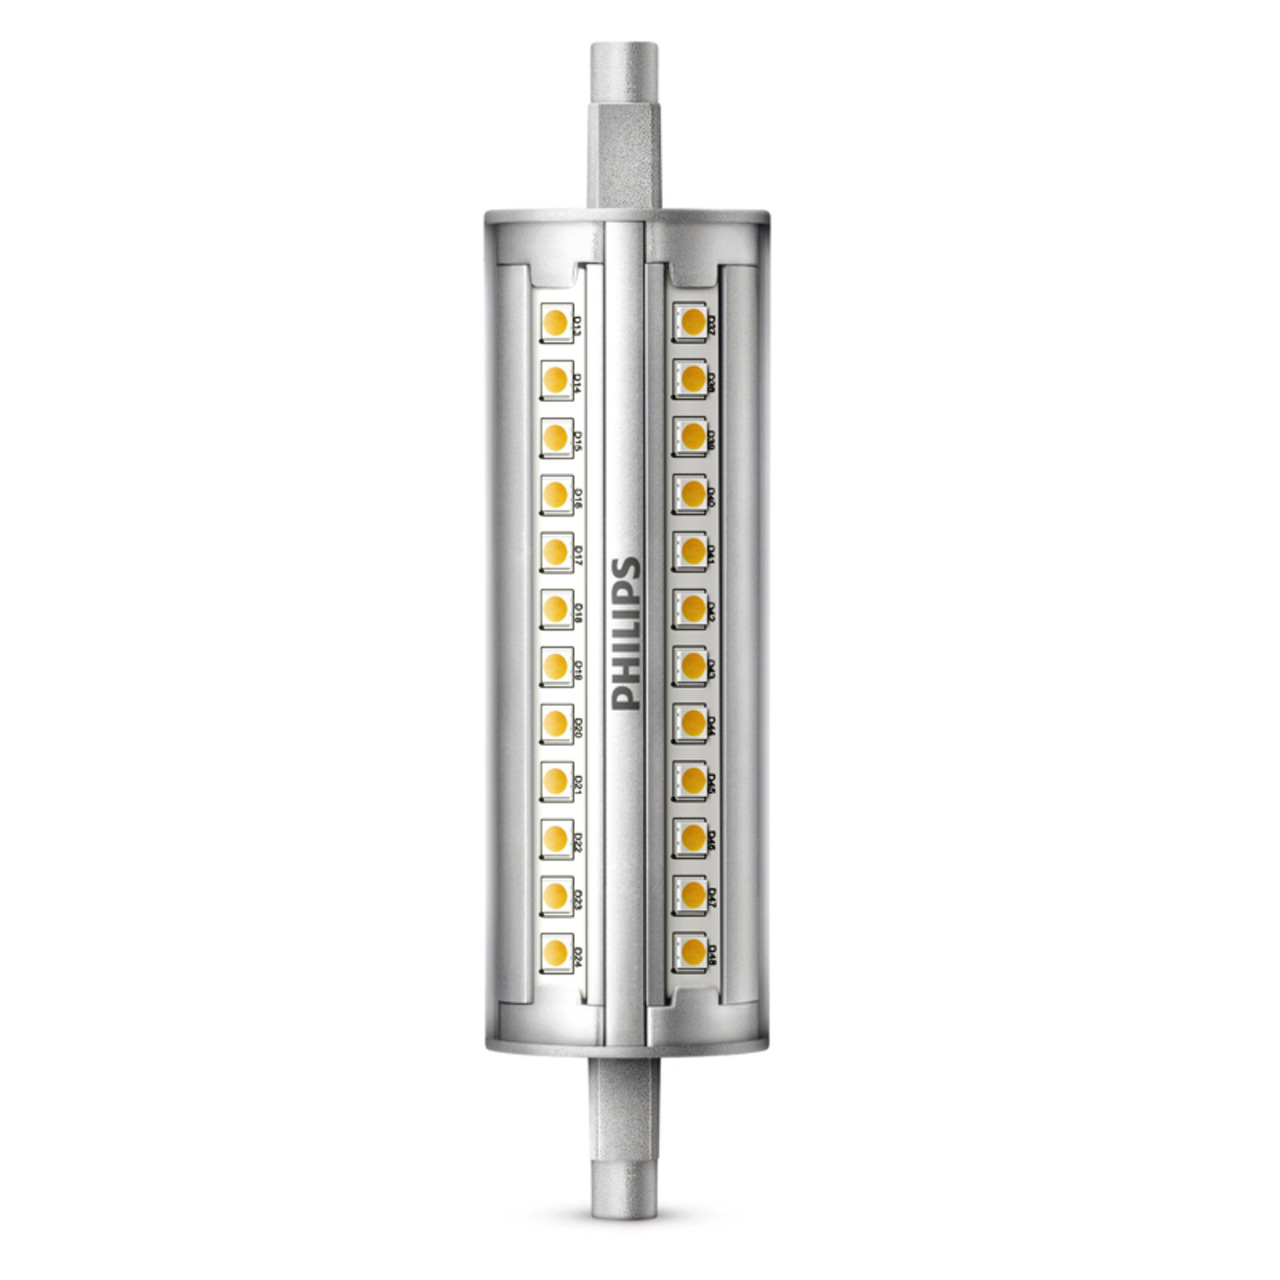 Philips CorePro LED 14-W-R7s-LED-Lampe 118mm- warmweiss- dimmbar unter Beleuchtung